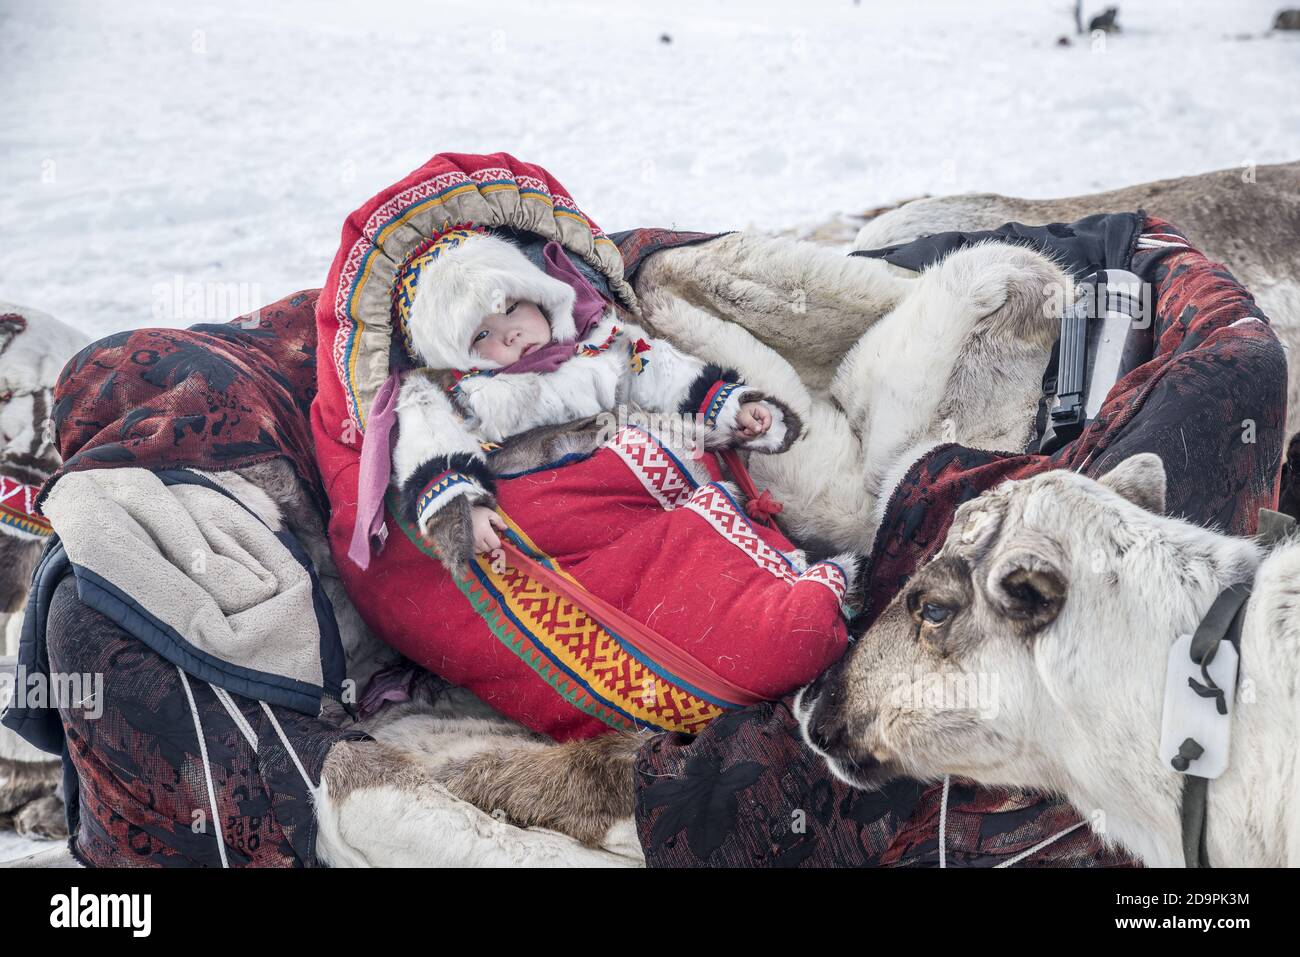 A small baby on a reindeer sleigh during the preparation for the migration, Yamalo-Nenets Autonomous Okrug, Russia Stock Photo